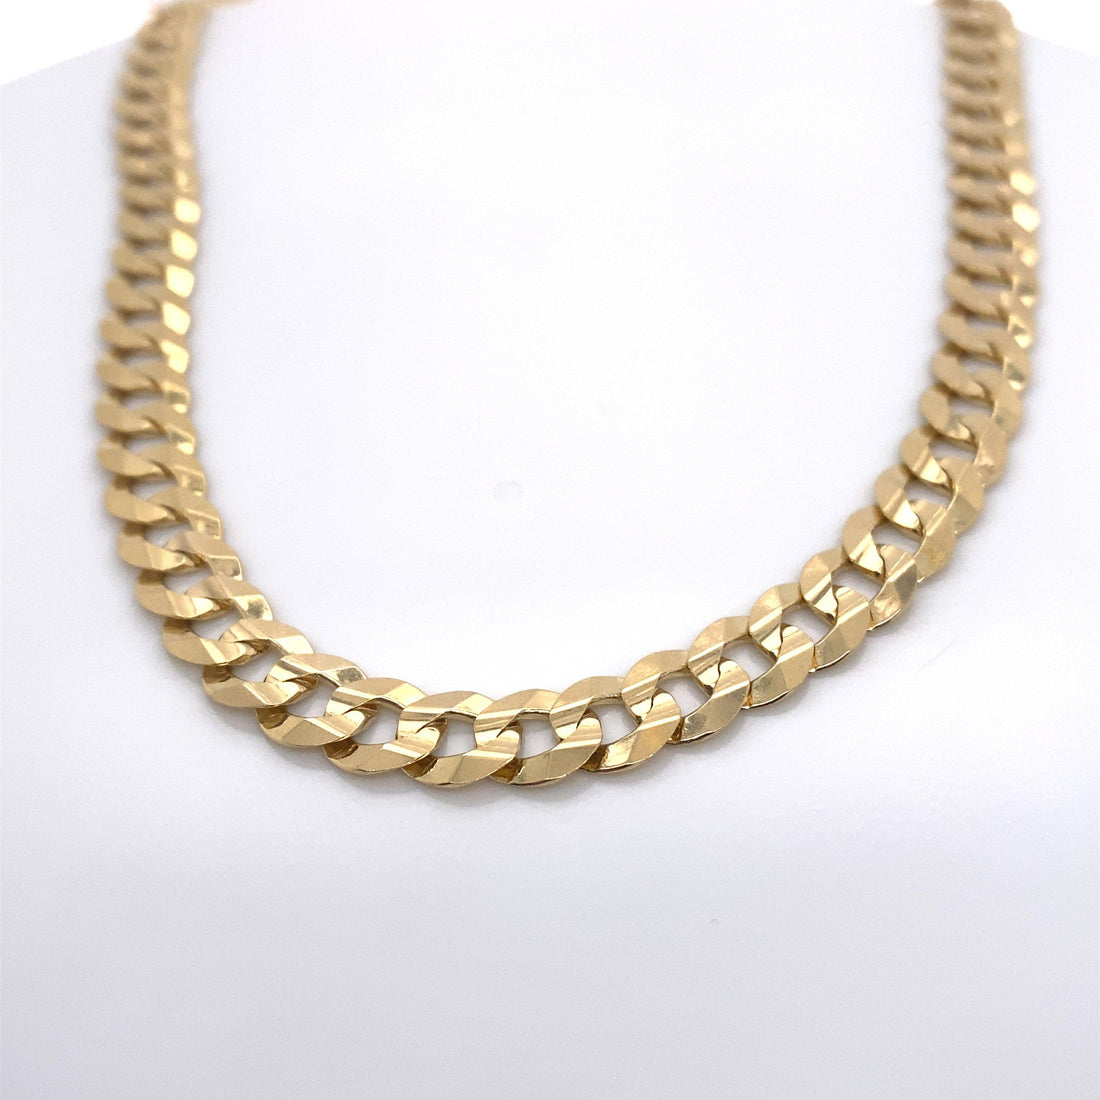 10K YELLOW GOLD CONCAVE CURB HEAVY CHAIN - Appelt&